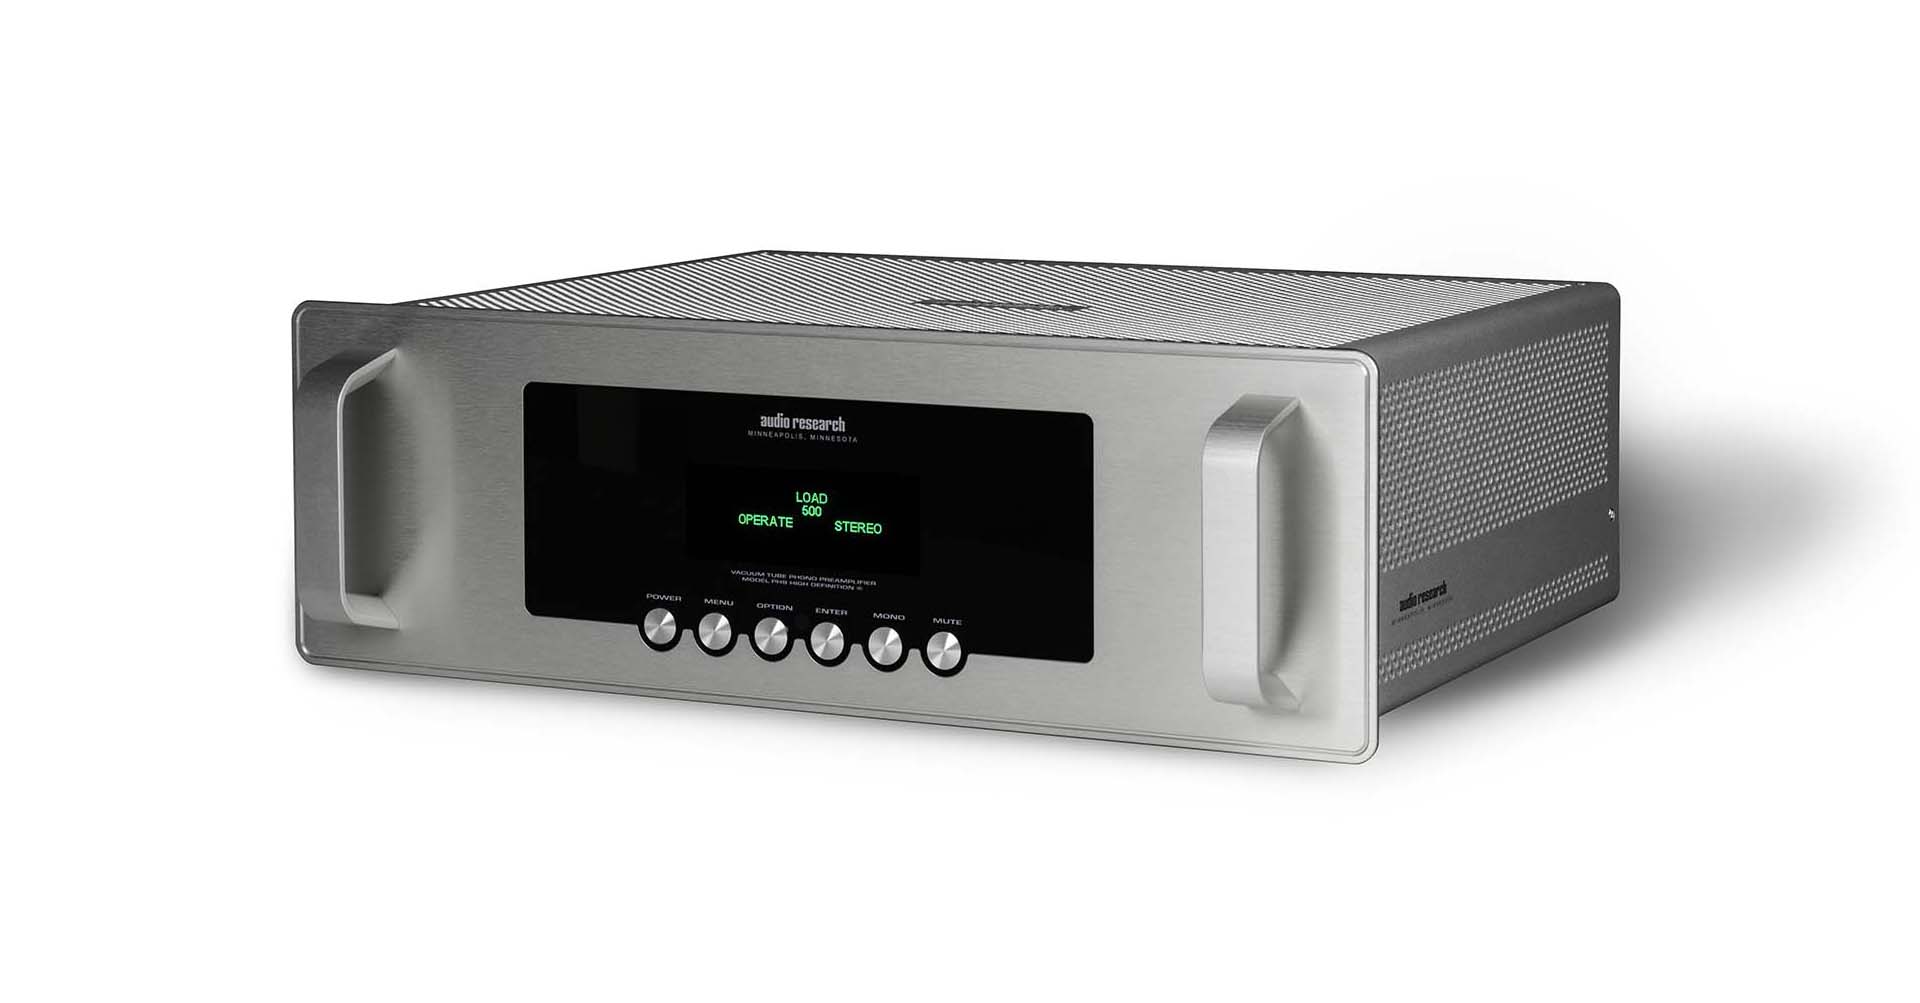 Audio Research PH 9 Phono Preamplifier